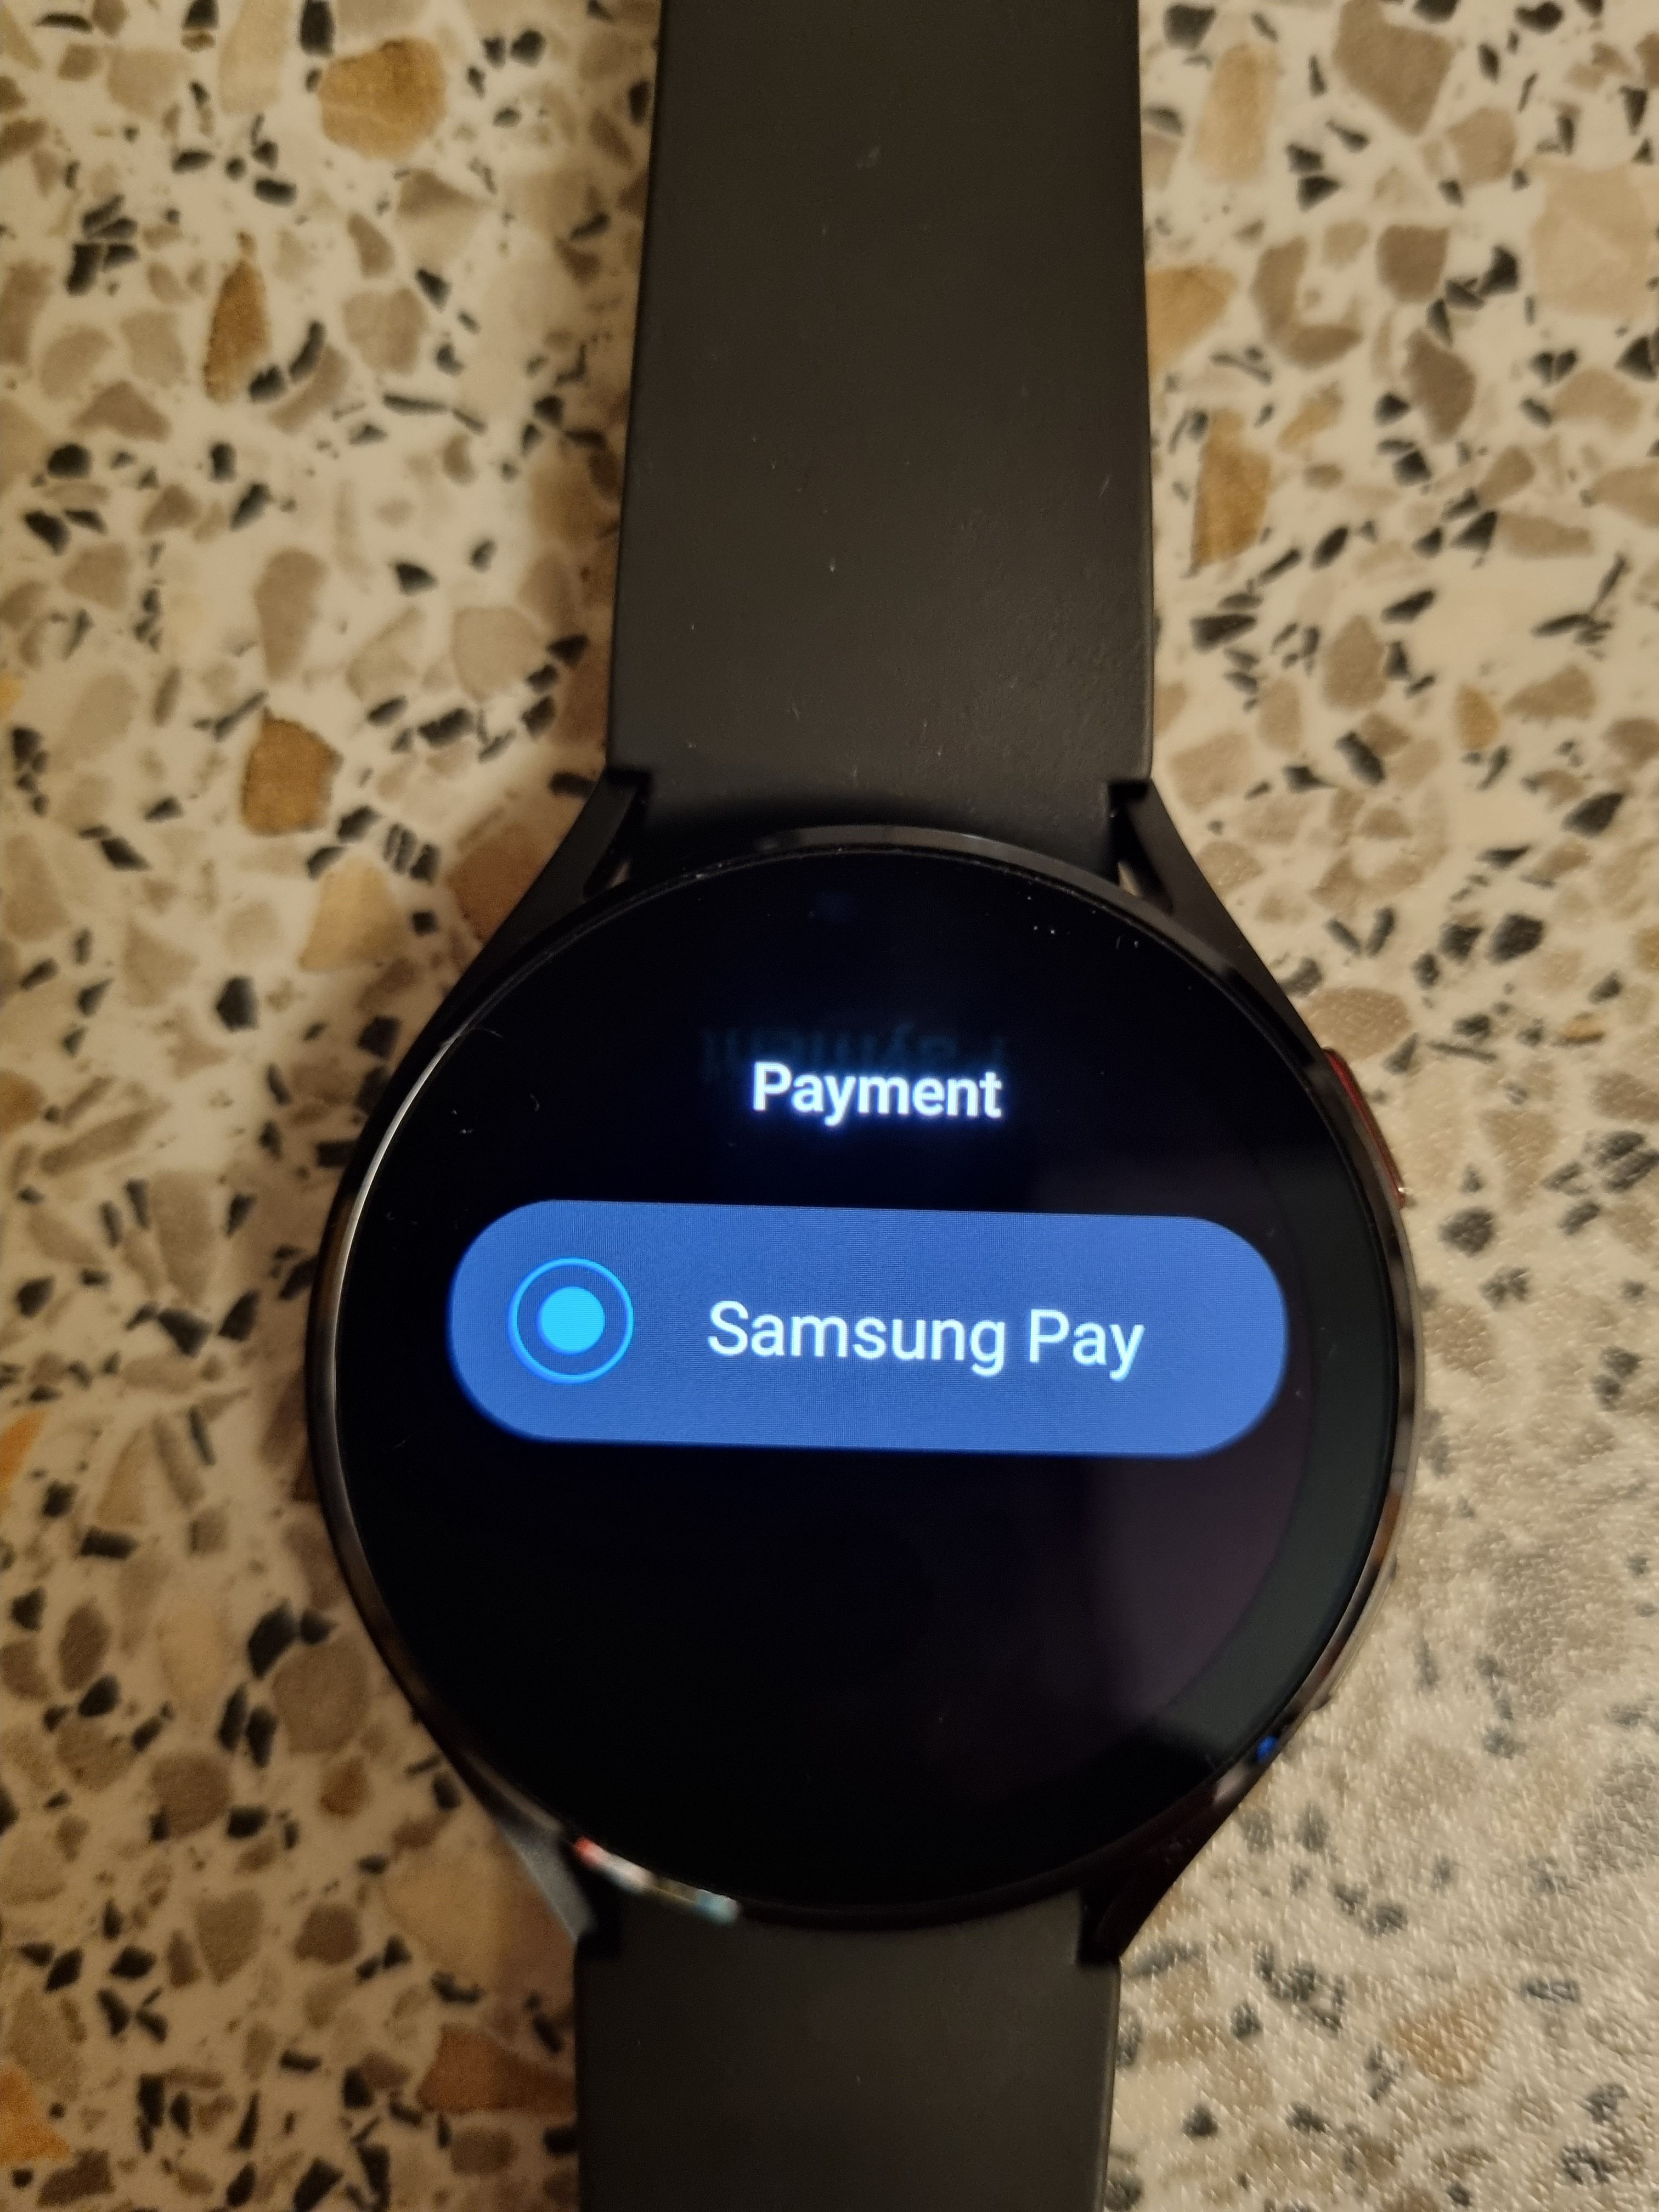 Google Pay on galaxy watch 4 not working - Page 4 - Samsung Community